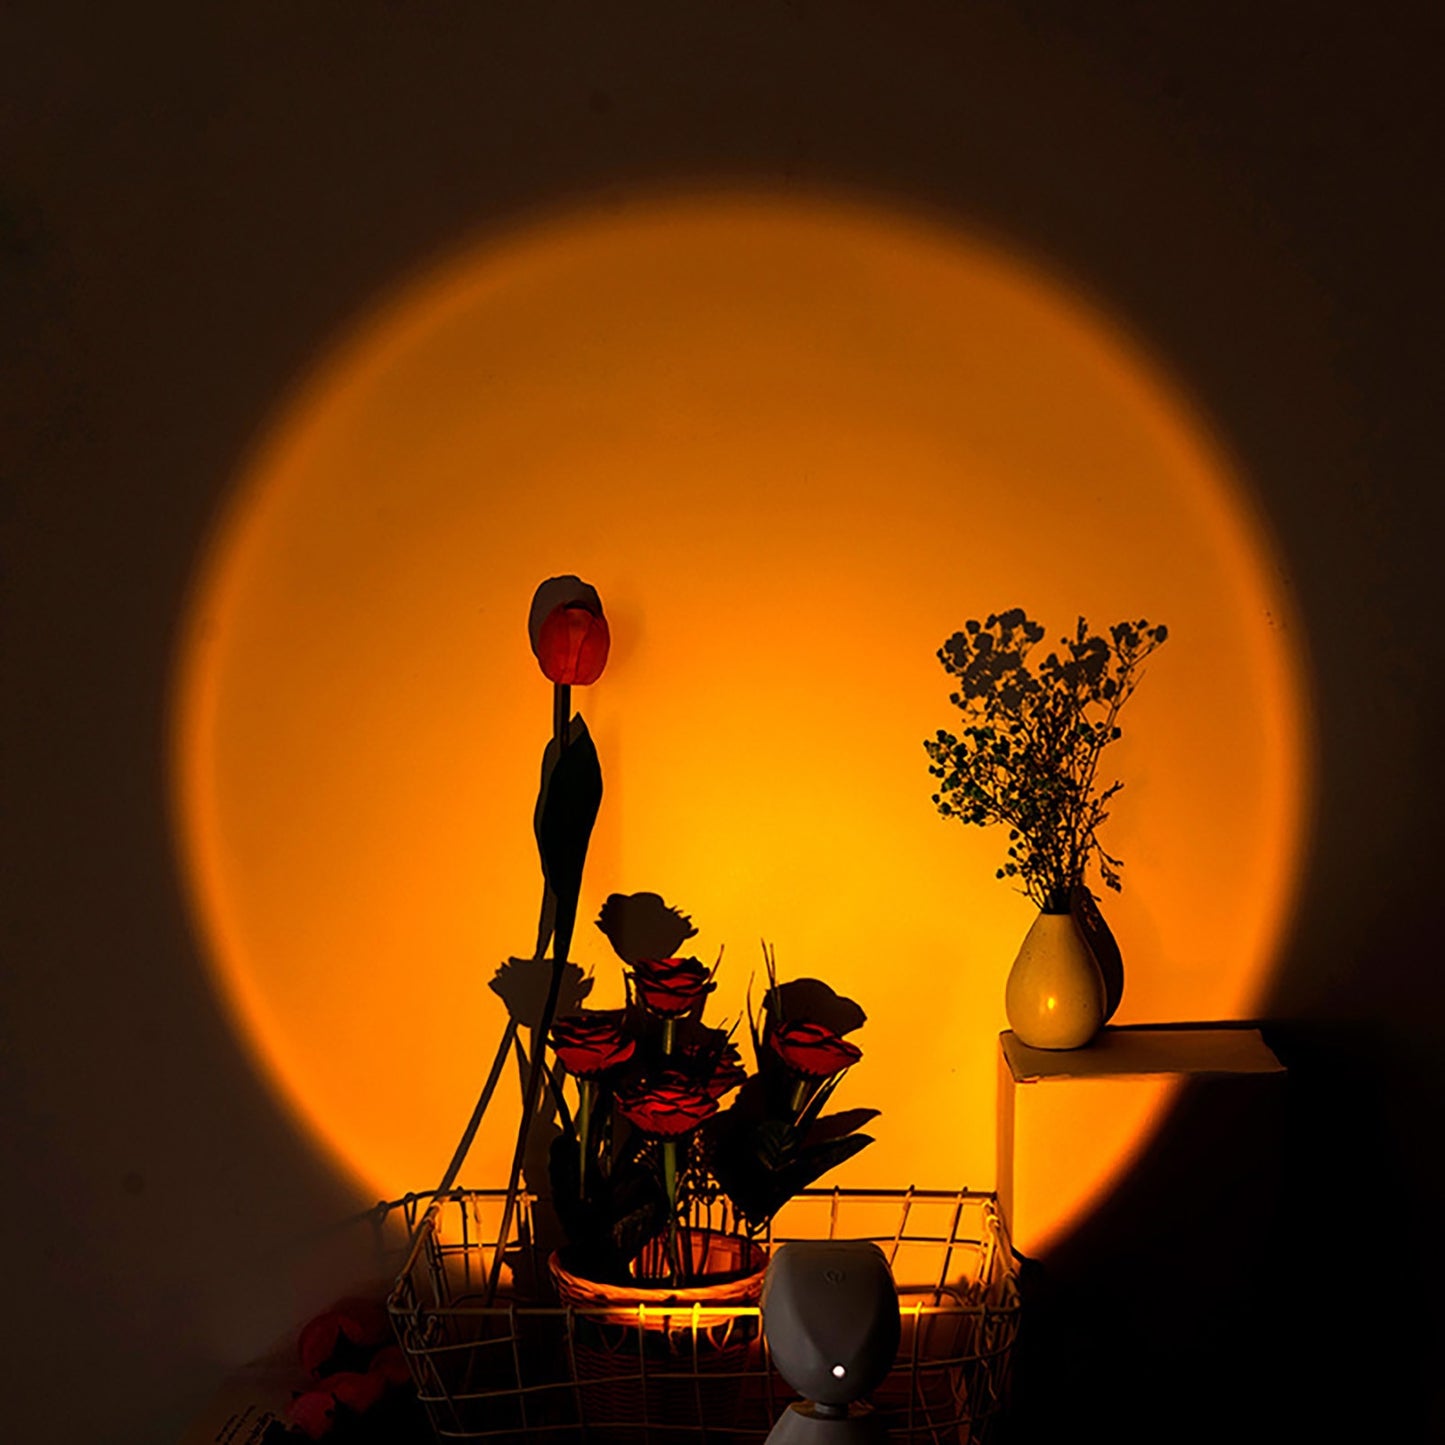 A colorful, illuminated circle creates a backdrop for a silhouette of a vase with flowers and other decor items on a shelf.